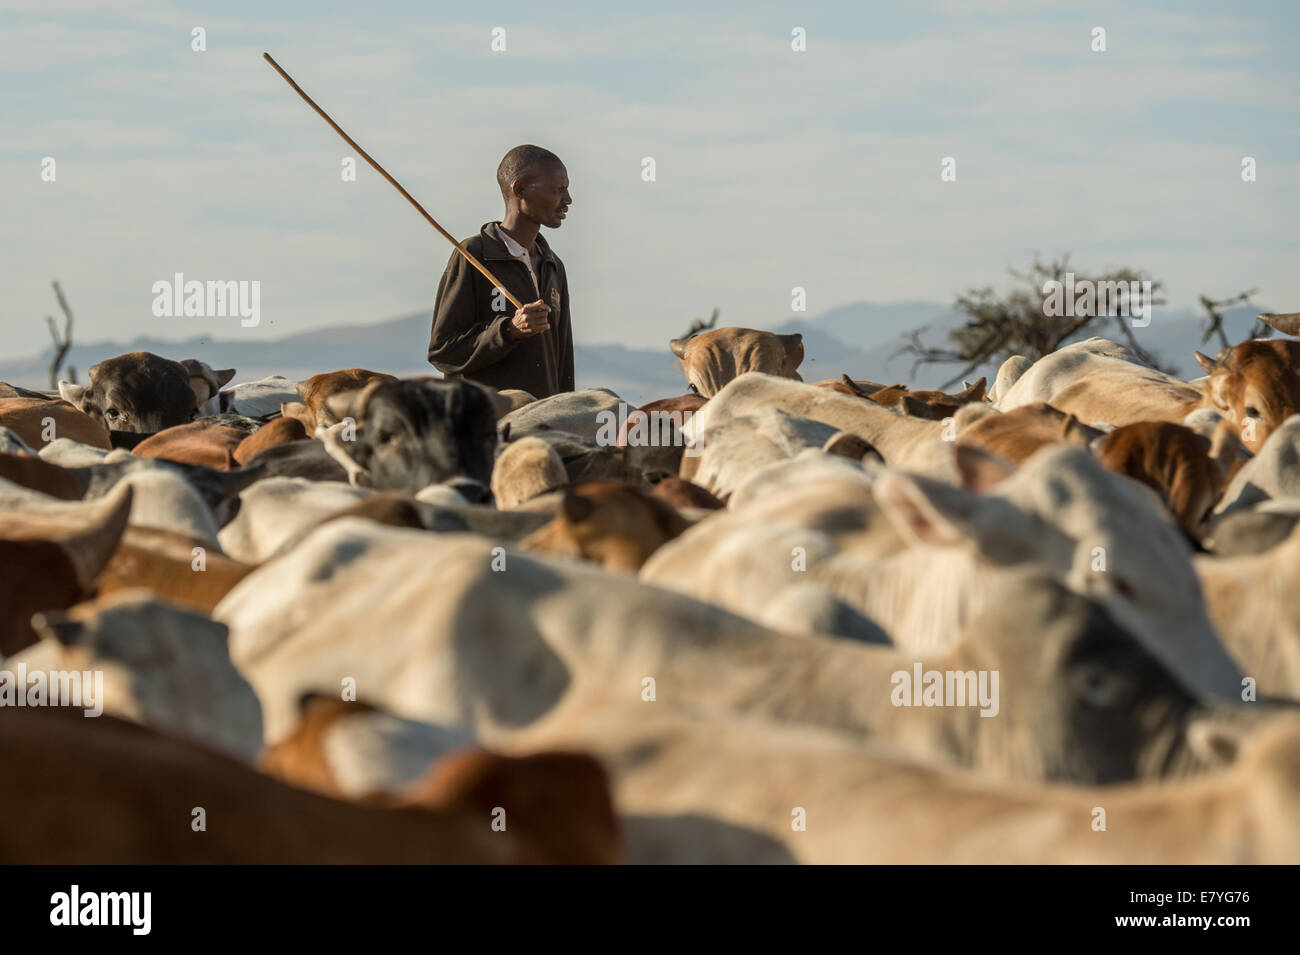 James Punyua watches cattle at Lewa Wildlife Conservancy which is part of a “Livestock to Market” business that shifts more of t Stock Photo